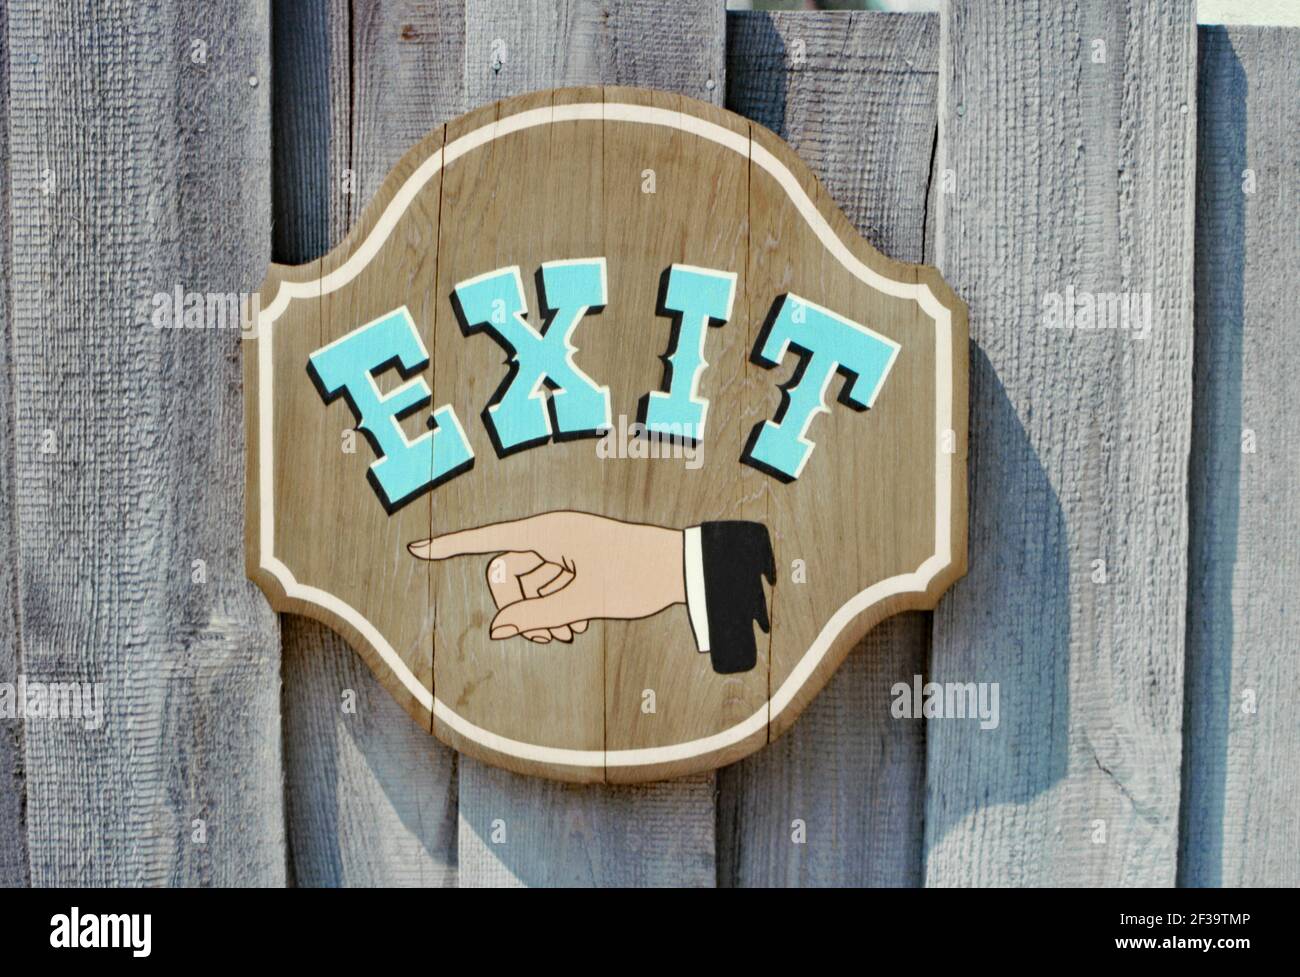 An exit sign at Silver Springs Wild Waters, Silver Springs, Florida, USA in 1980. The finger points the way out. This water park was adjacent to Silver Springs Nature Theme Park. Opened in 1978, it was a small park by today’s standards but it attracted people who enjoyed a more traditional water park experience. It was among the first water parks in the country to have fiberglass flume rides. Wild Waters closed in 2016. This image is from an old American amateur Kodak colour transparency – a vintage 1980s photograph. Stock Photo